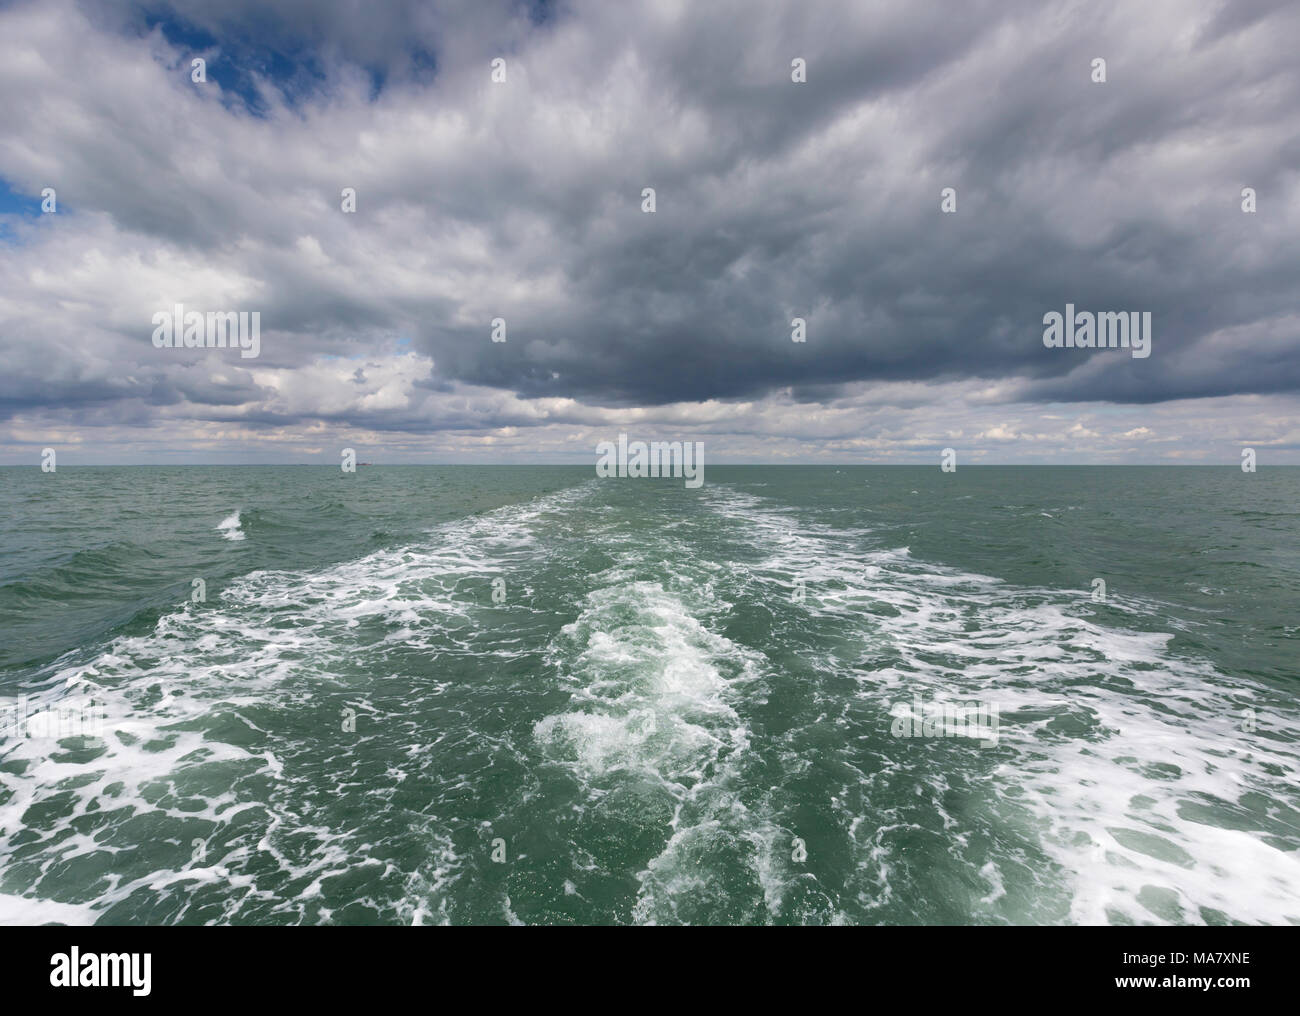 The Thames Estuary off the north Kent coast taken from a small boat. Stock Photo